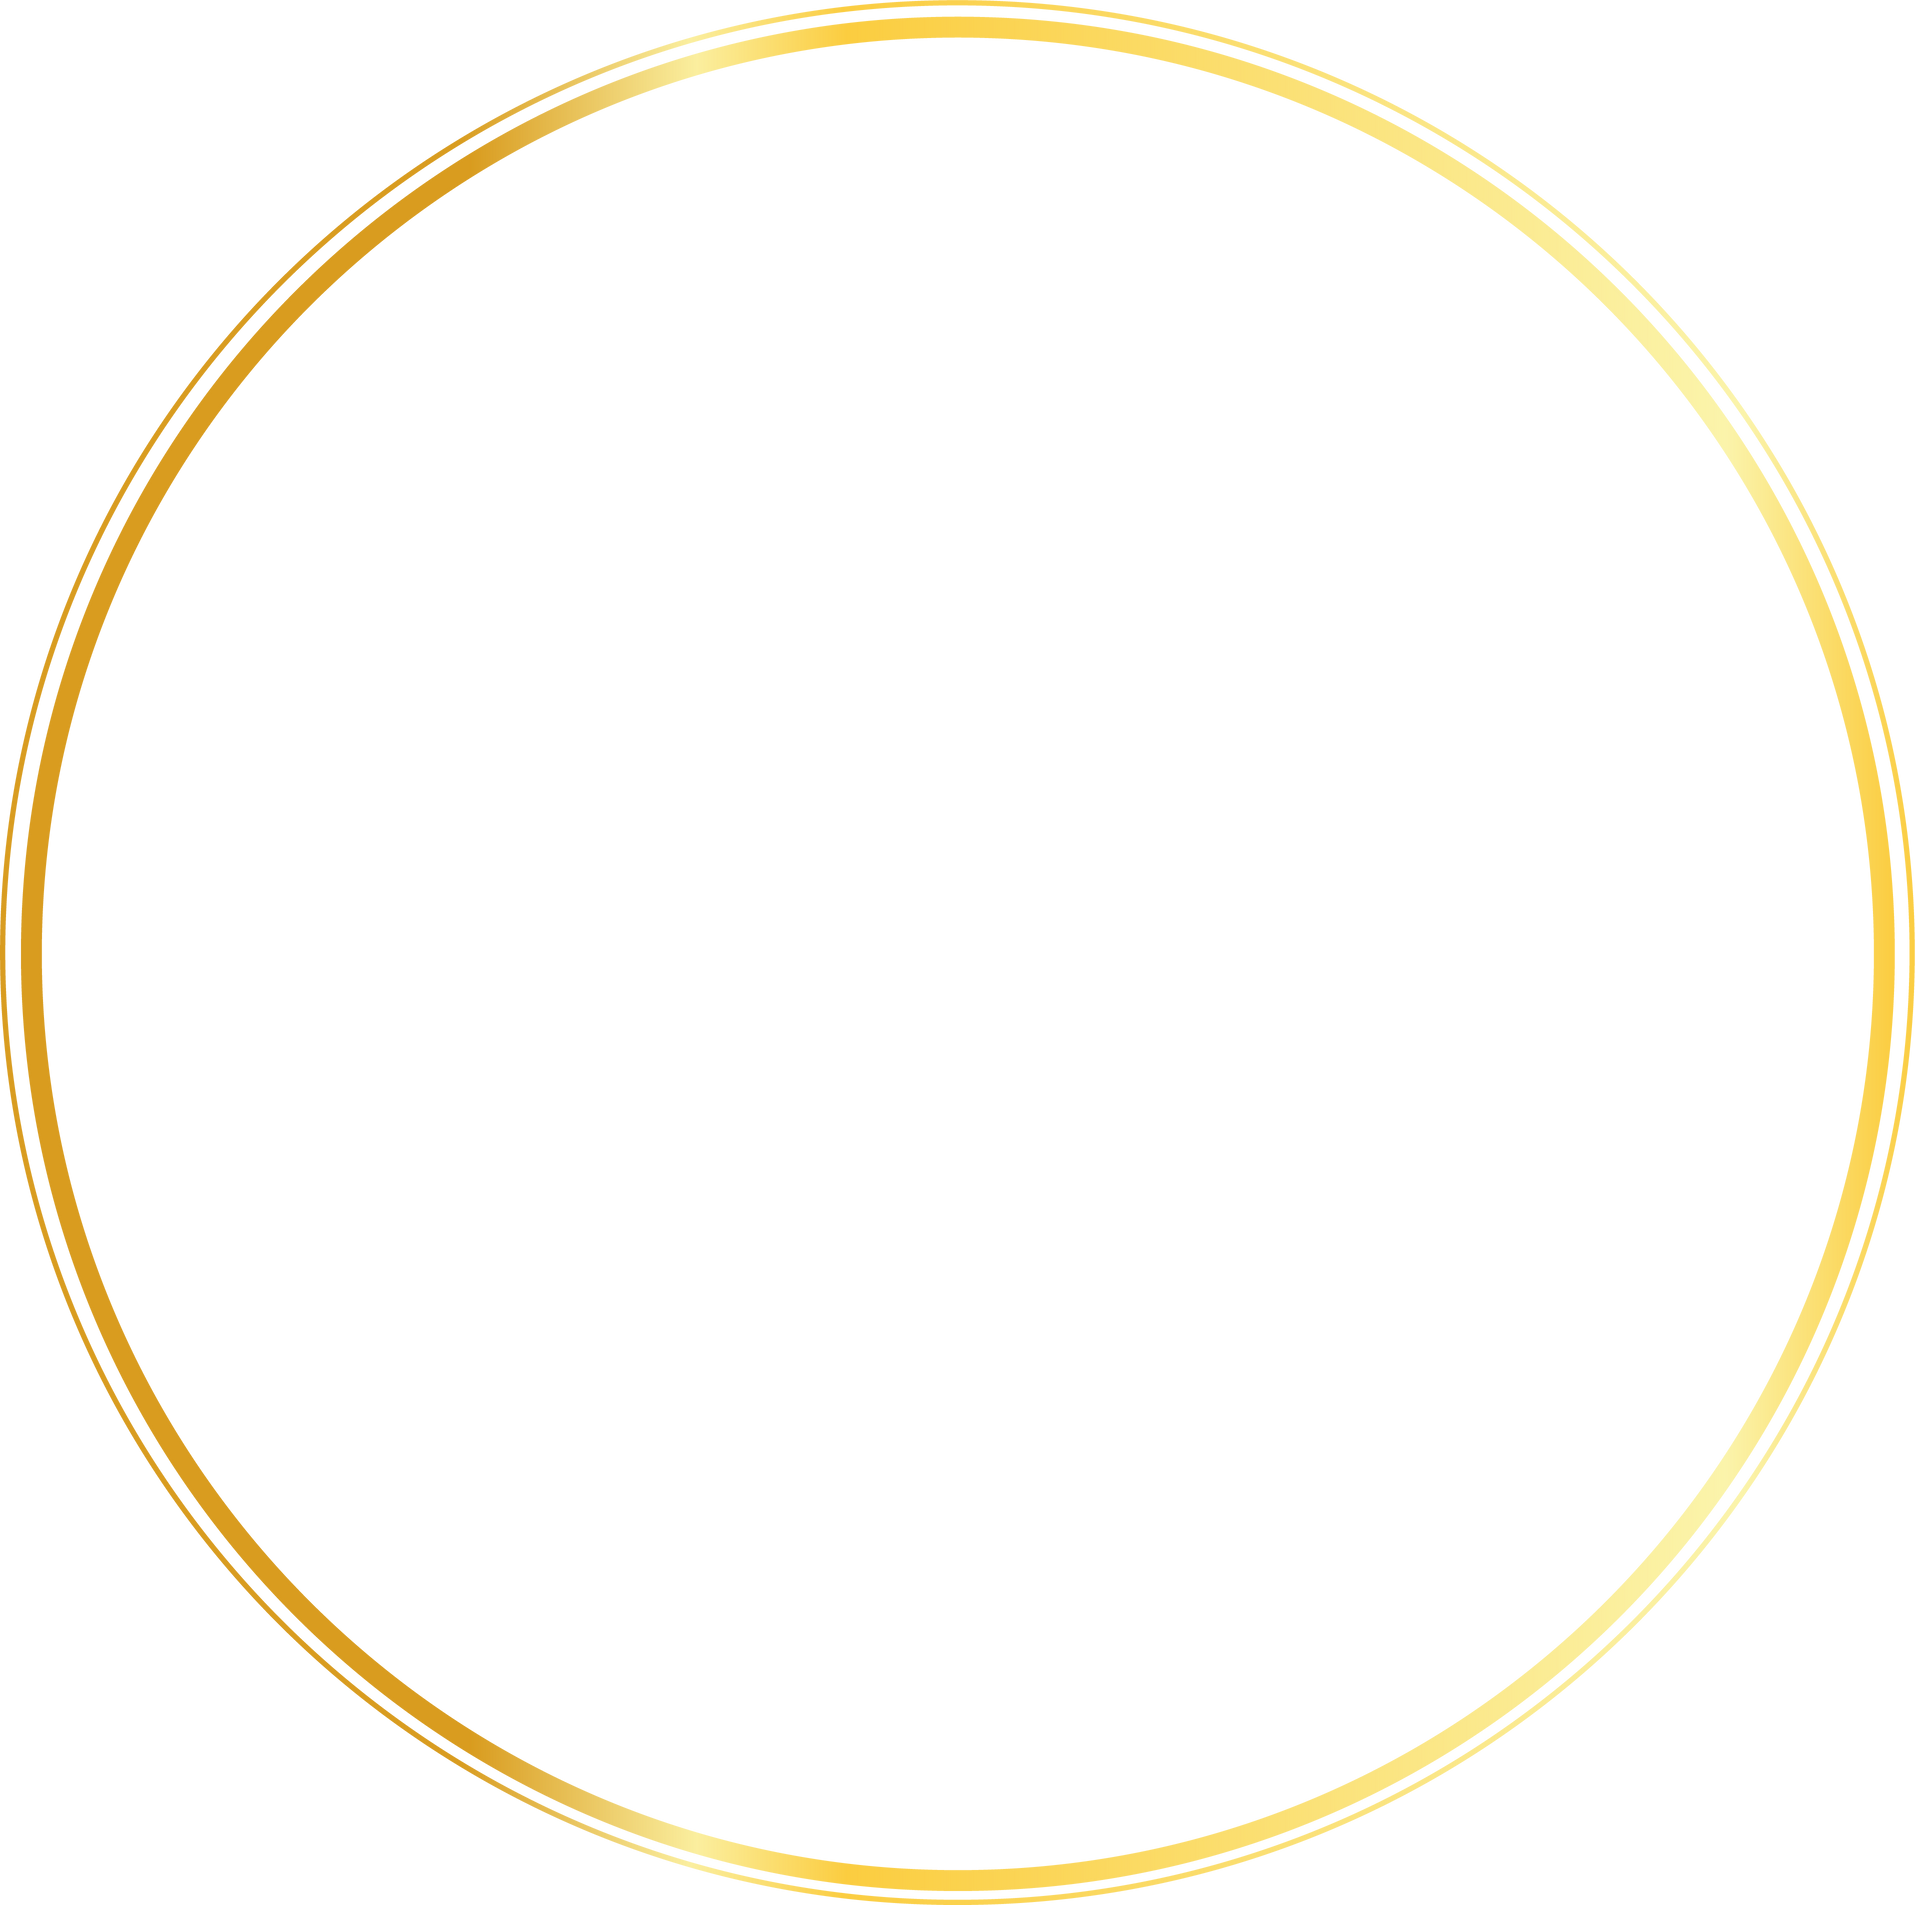 Circle round Aesthetic gold shape abstract frame border background element